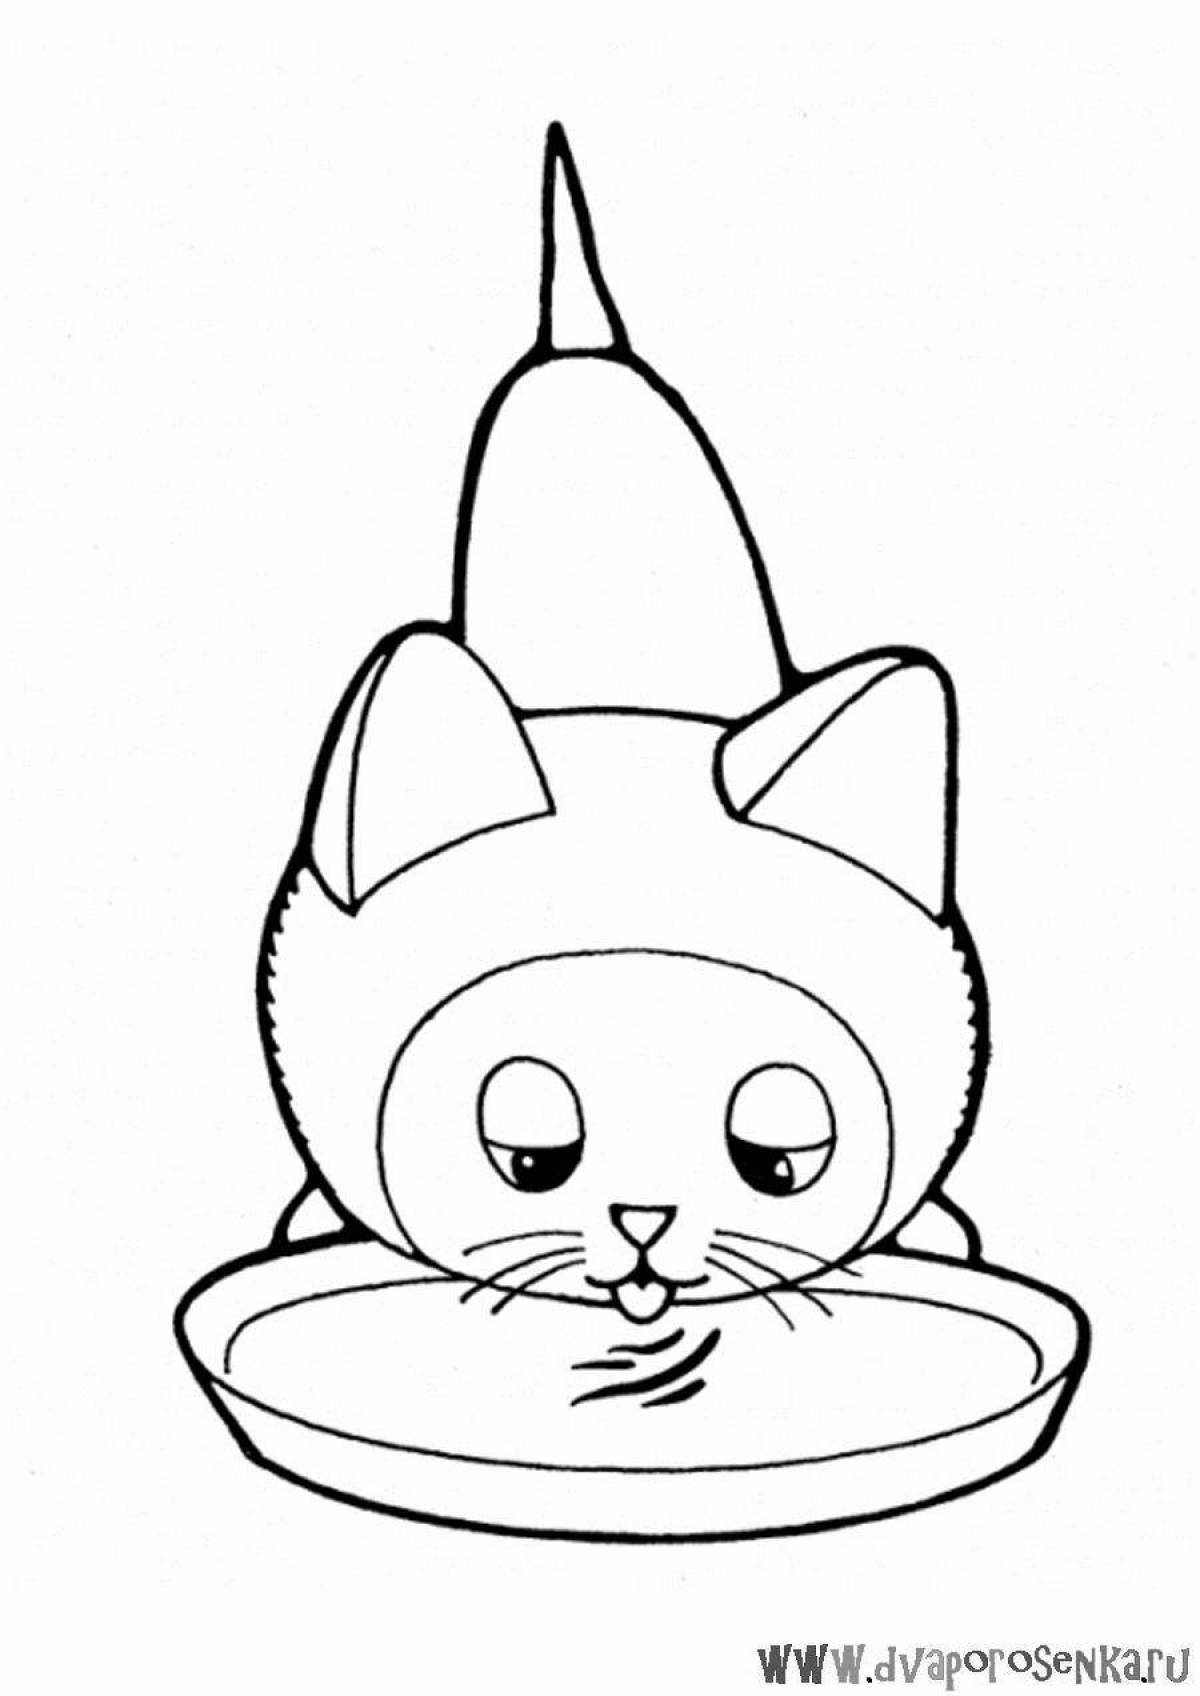 Coloring page enthusiastic cat drinking milk